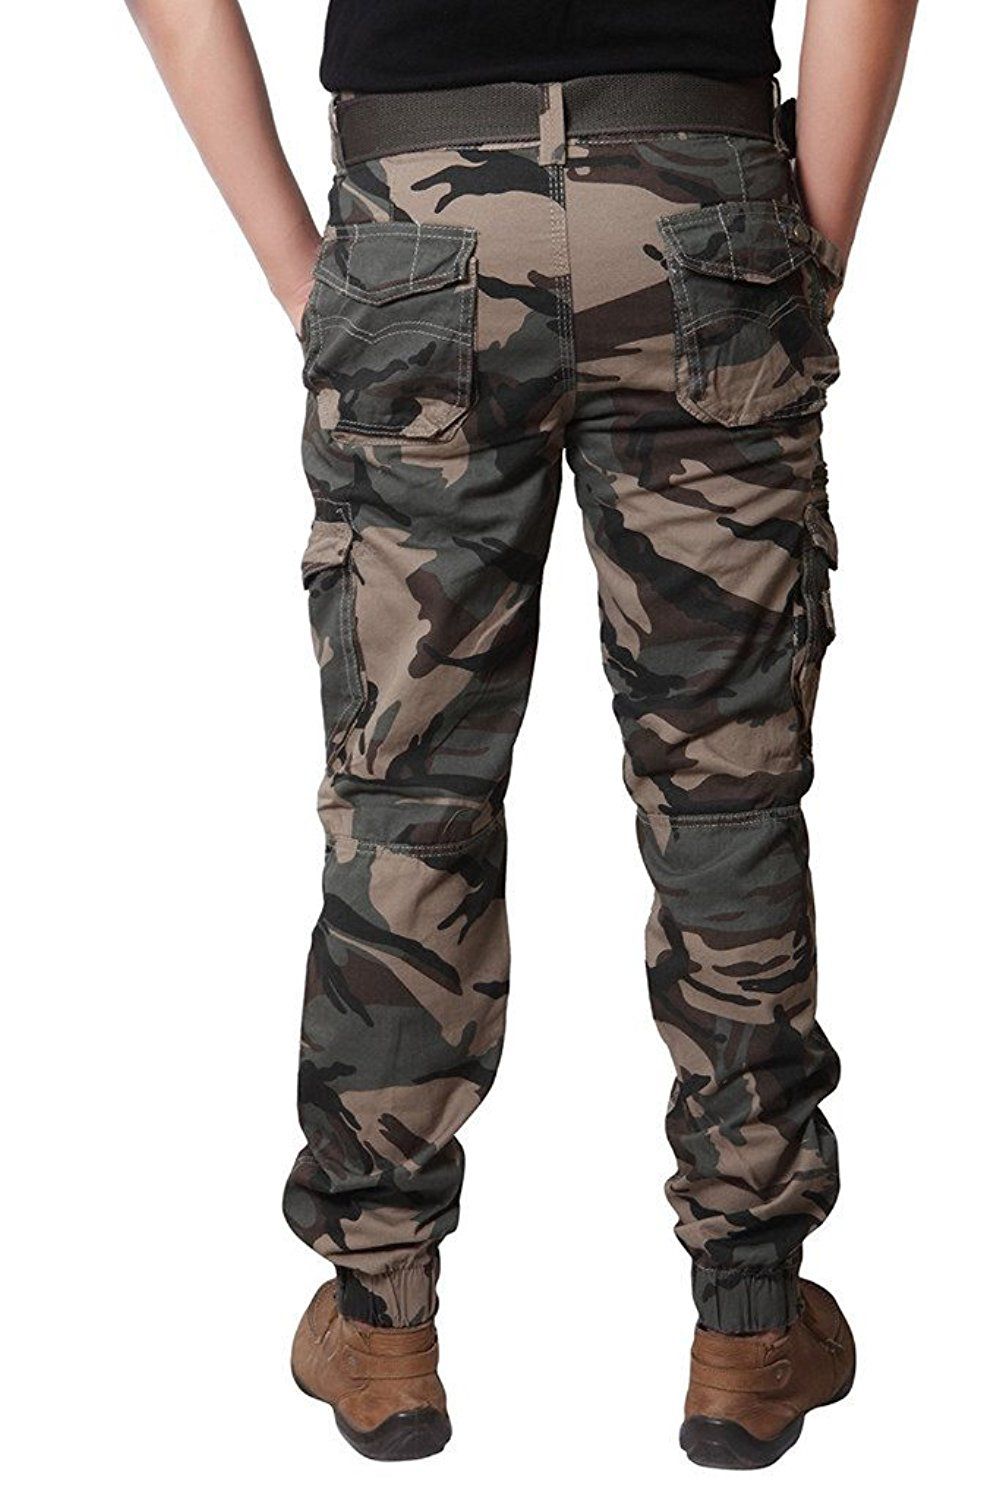 Verticals Army Print Cargo Pants for Men and Boys - Buy Verticals Army ...